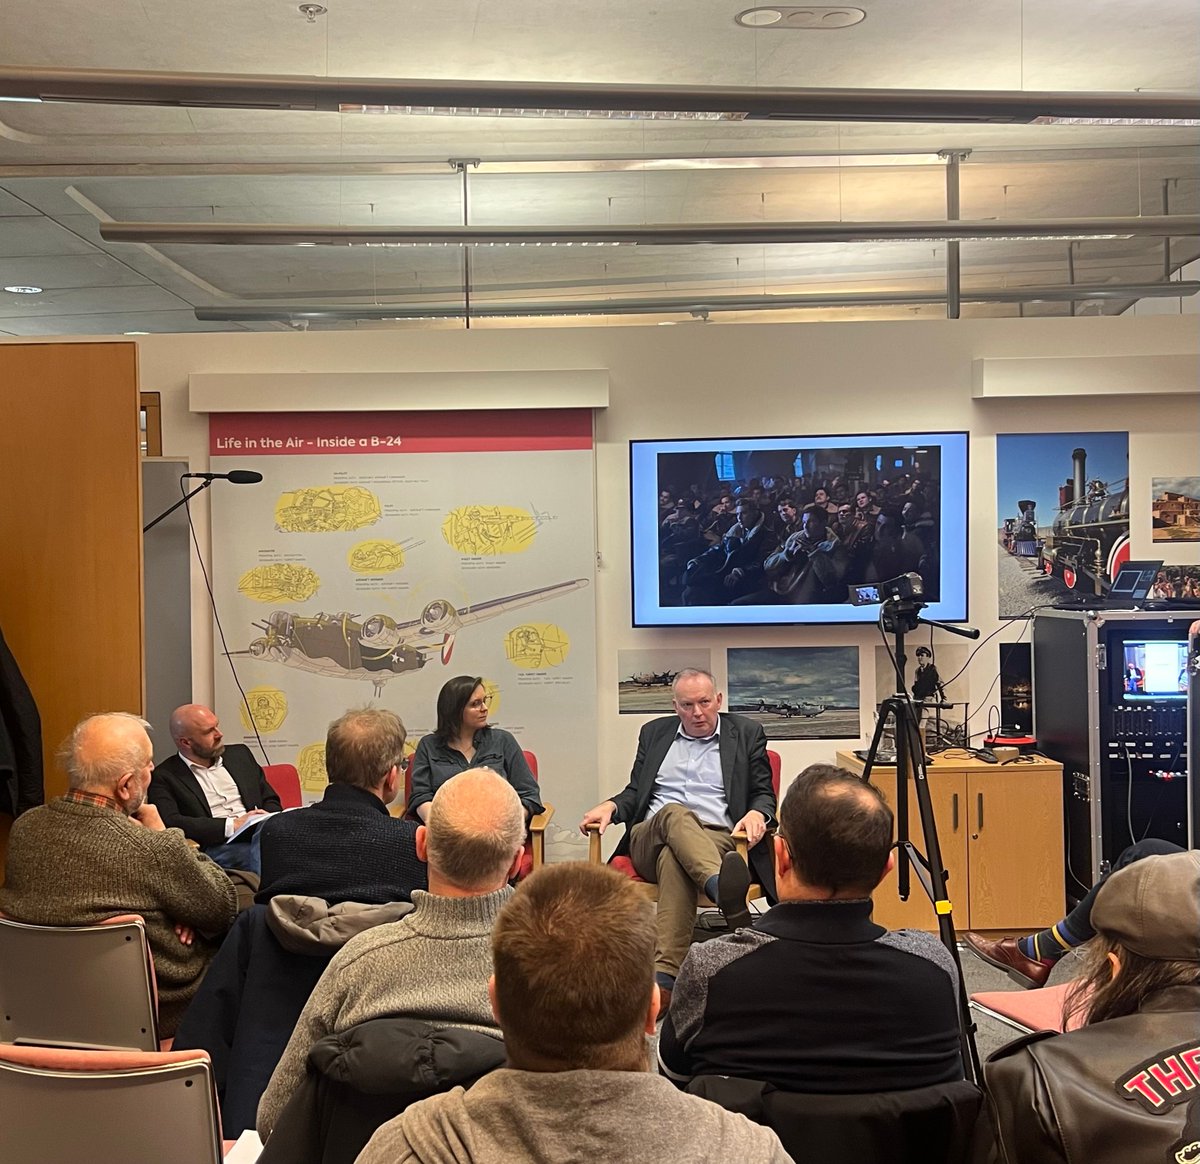 Thank you to everyone who joined us this weekend for On Target! Our presenters Dr. Sam Edwards, Dr. Graham Cross, and Dr. Hattie Hearn led a great discussion about Masters of the Air and the true stories of the 8th Air Force.